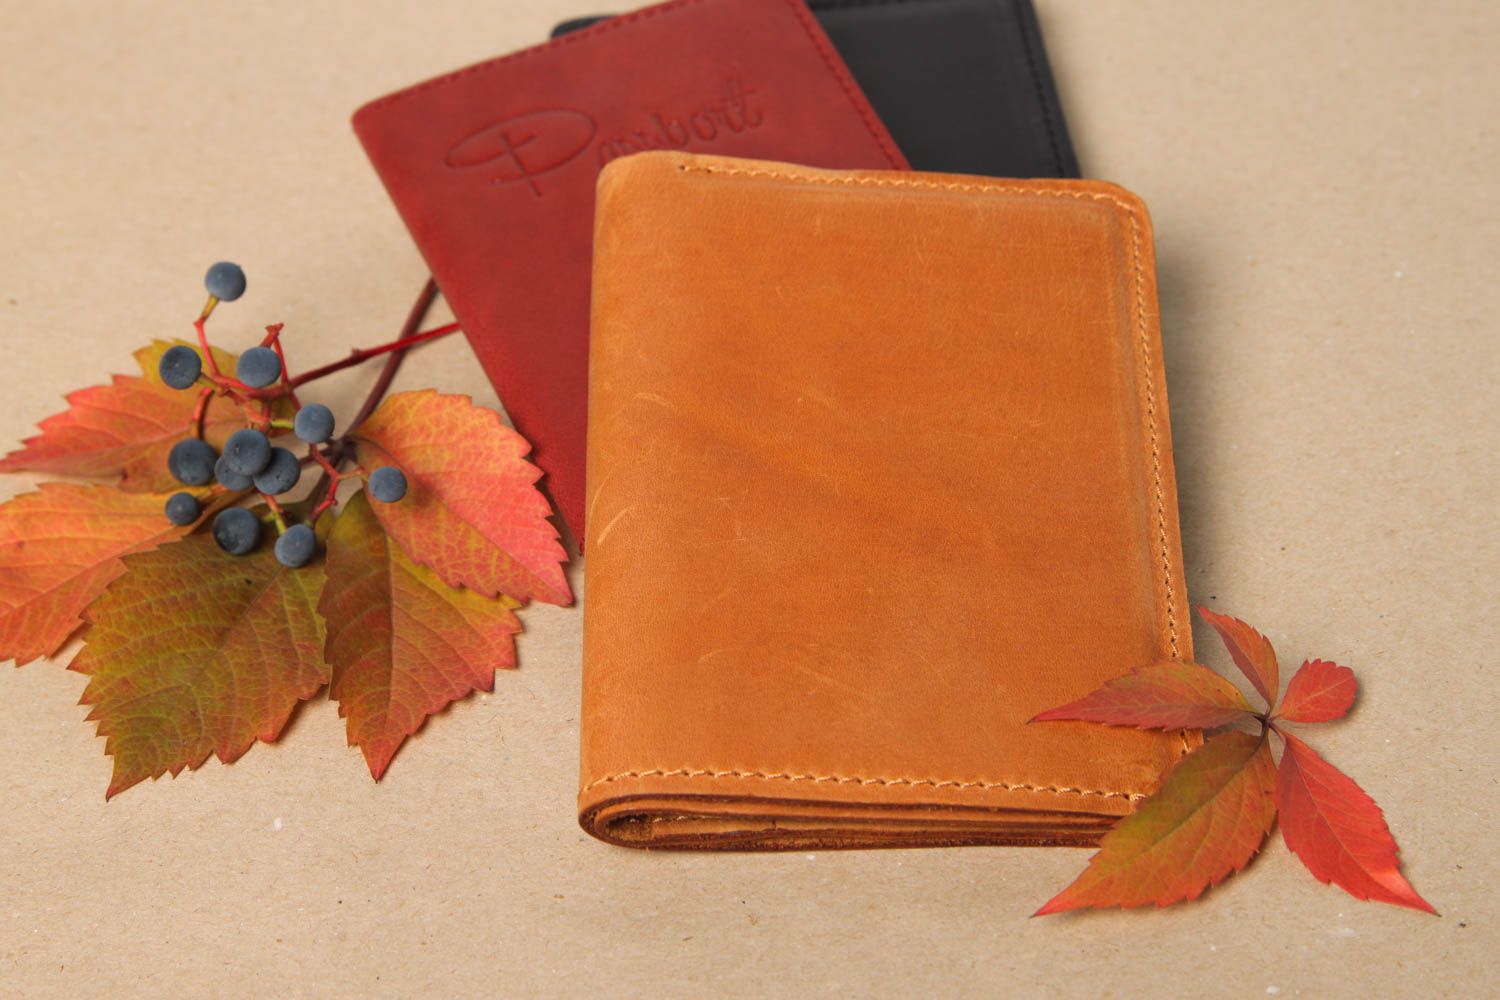 Stylish handmade leather wallet fashion accessories best gifts for him photo 1